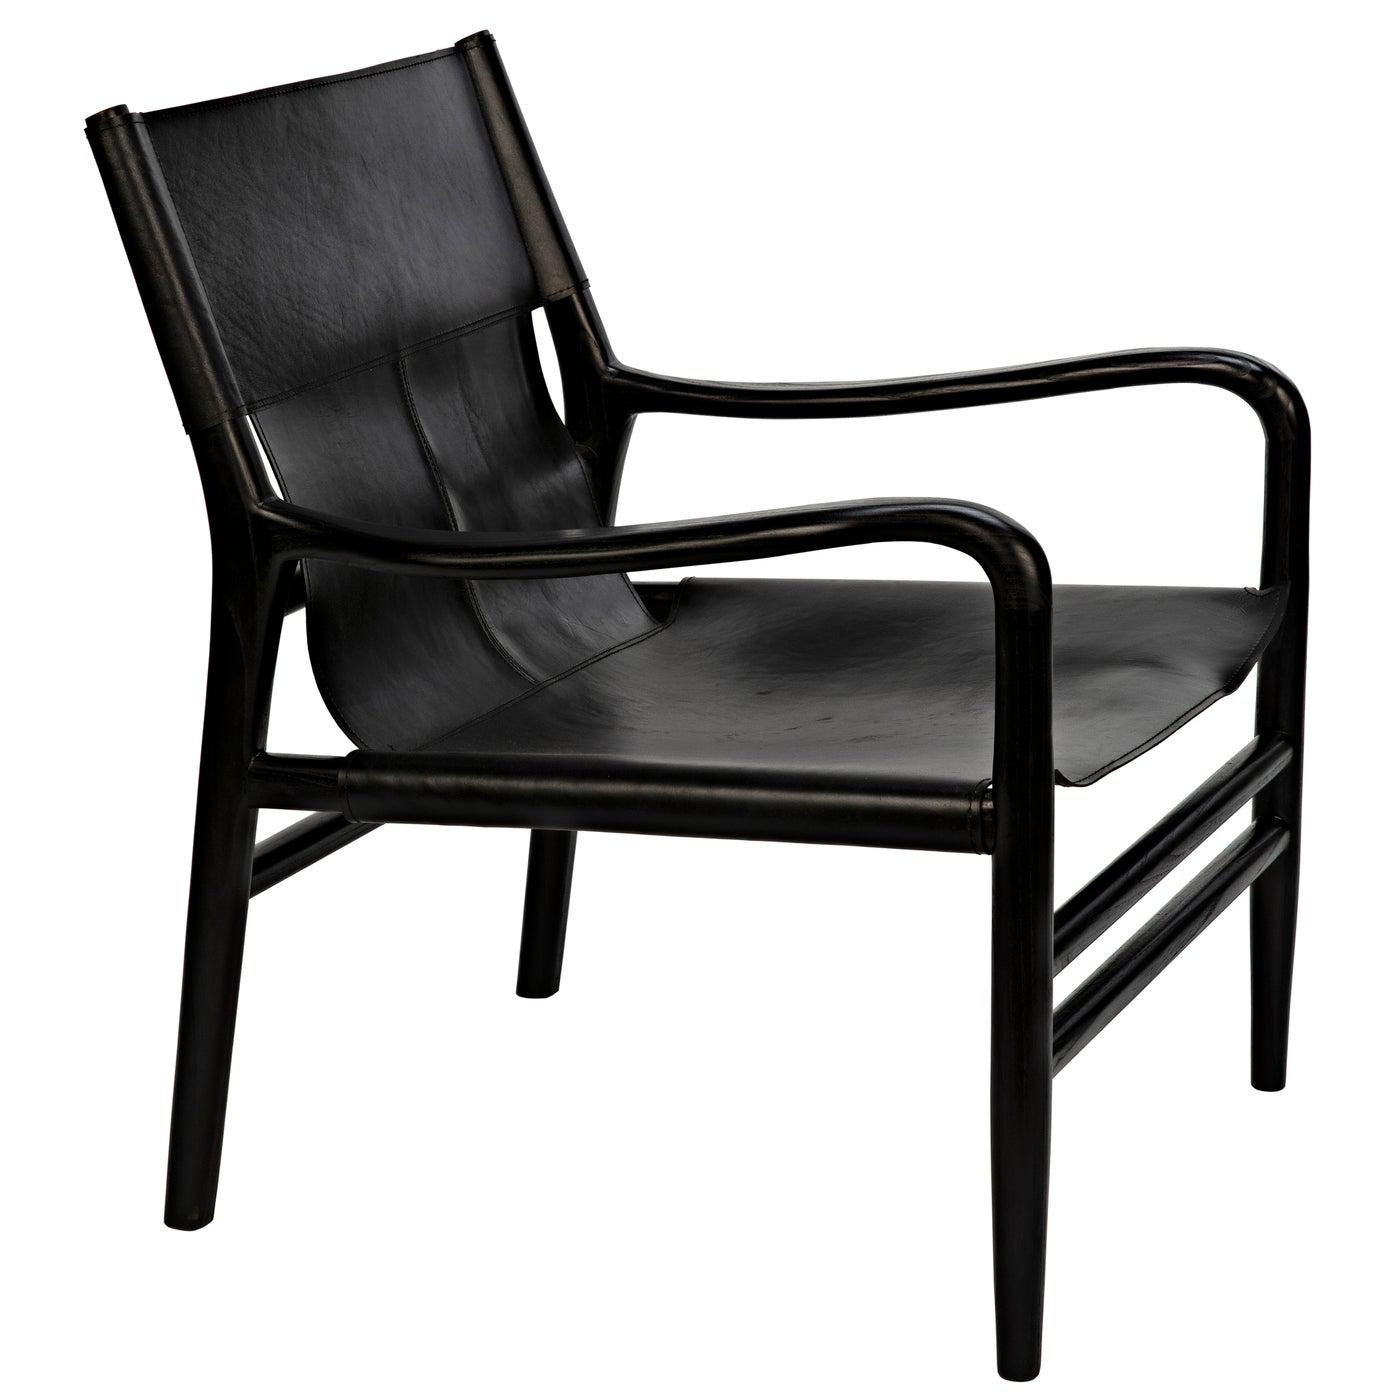 Clancy Chair with Leather, Charcoal Black